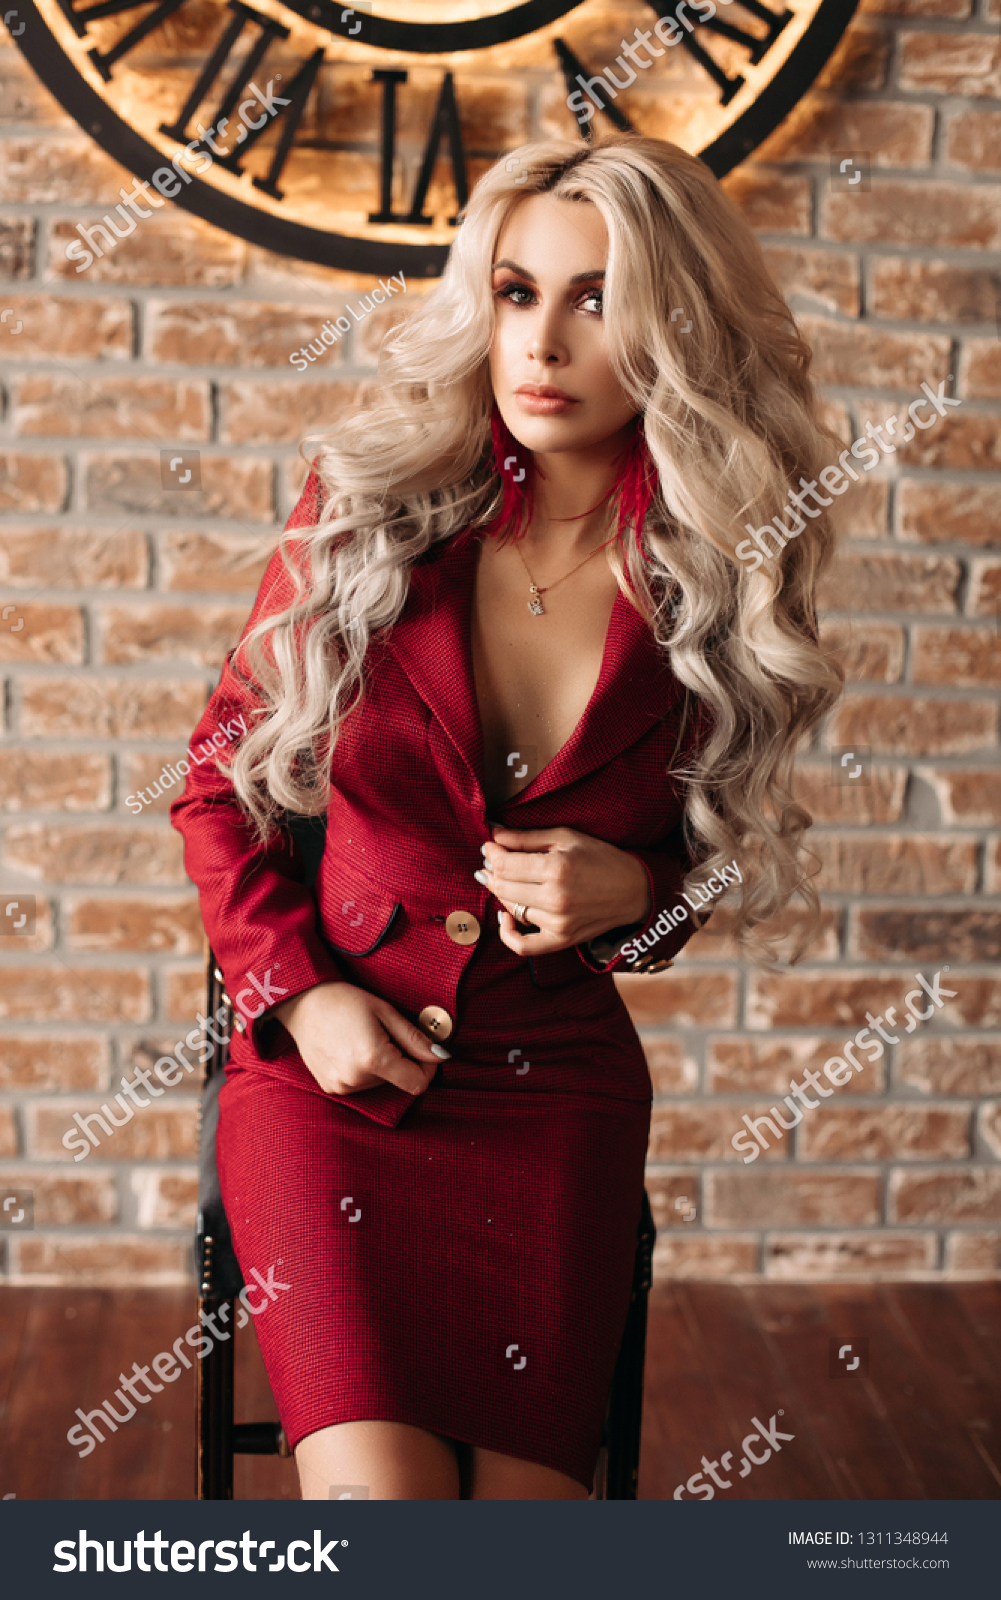 Portrait Stunning Sexy Blonde Woman picture